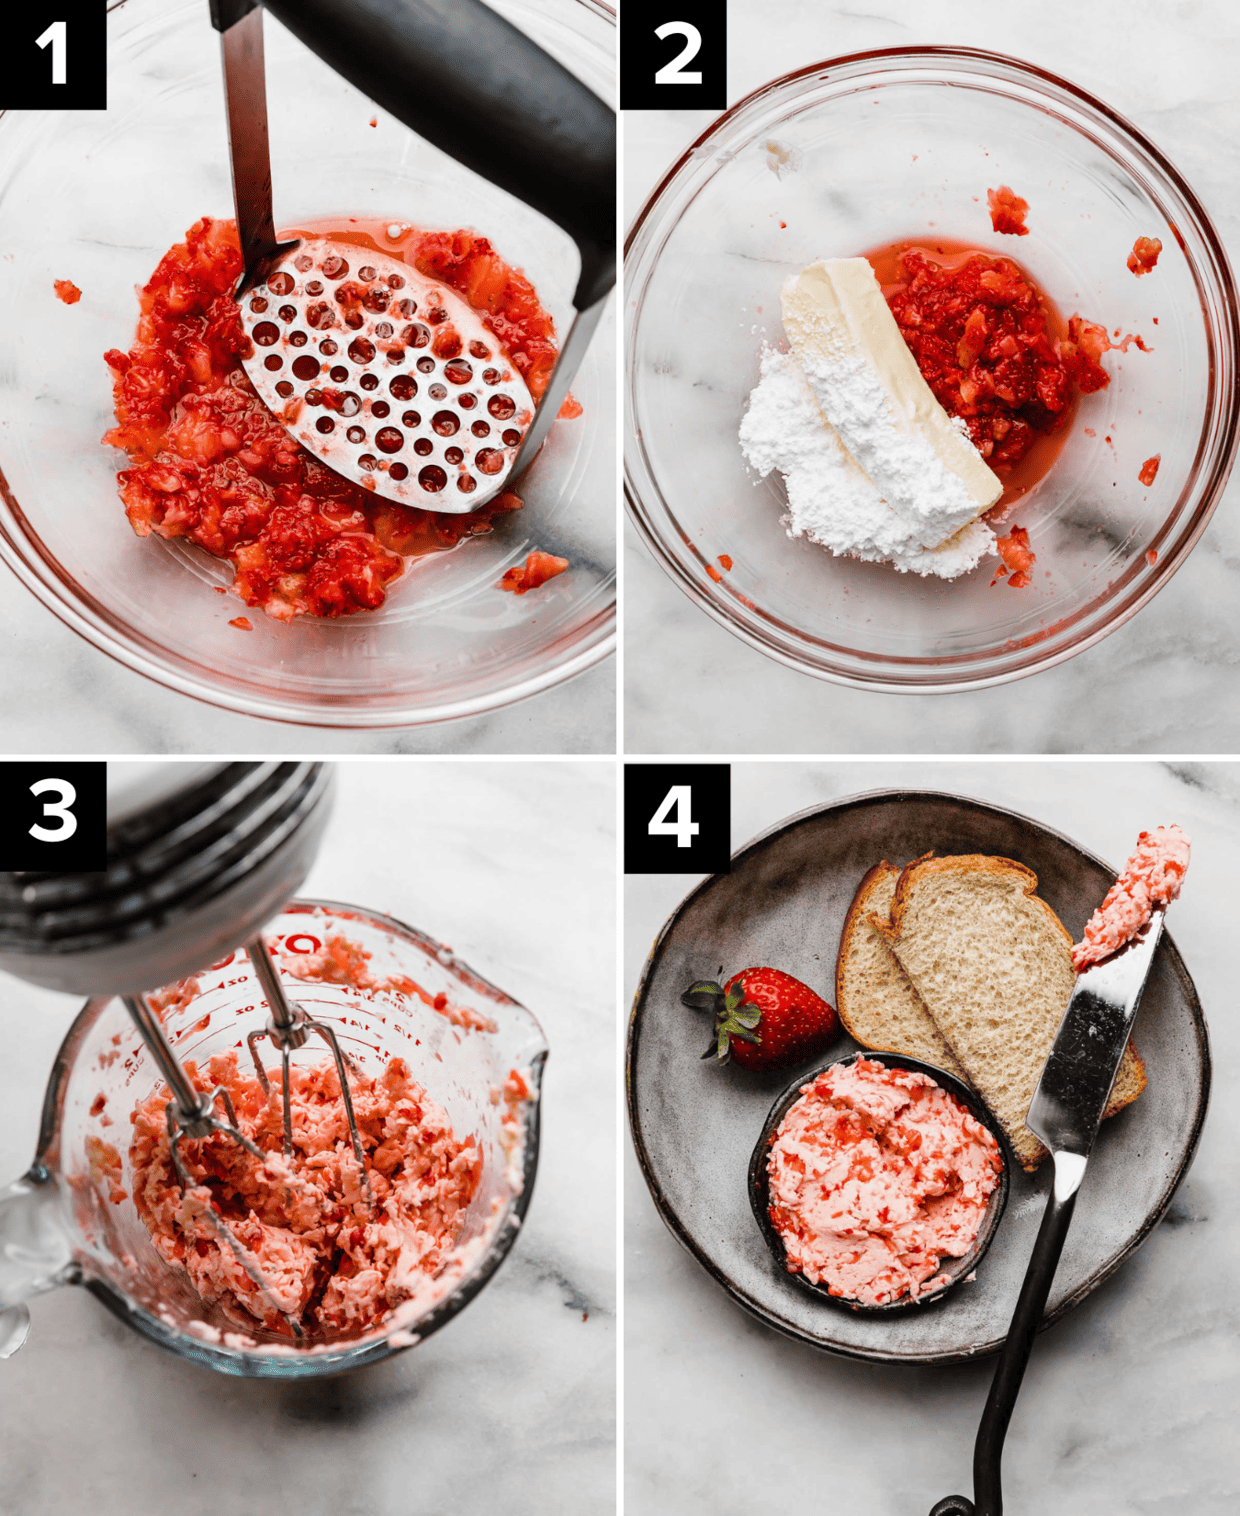 Four photos showing how to make fresh Strawberry Butter using 3 ingredients: top left image is mashed strawberries in a glass bowl, top right is butter, mashed berries, and powdered sugar in a glass bowl, bottom left image is strawberry butter being mixed by hand beaters, bottom right image is Strawberry Butter in a black bowl.